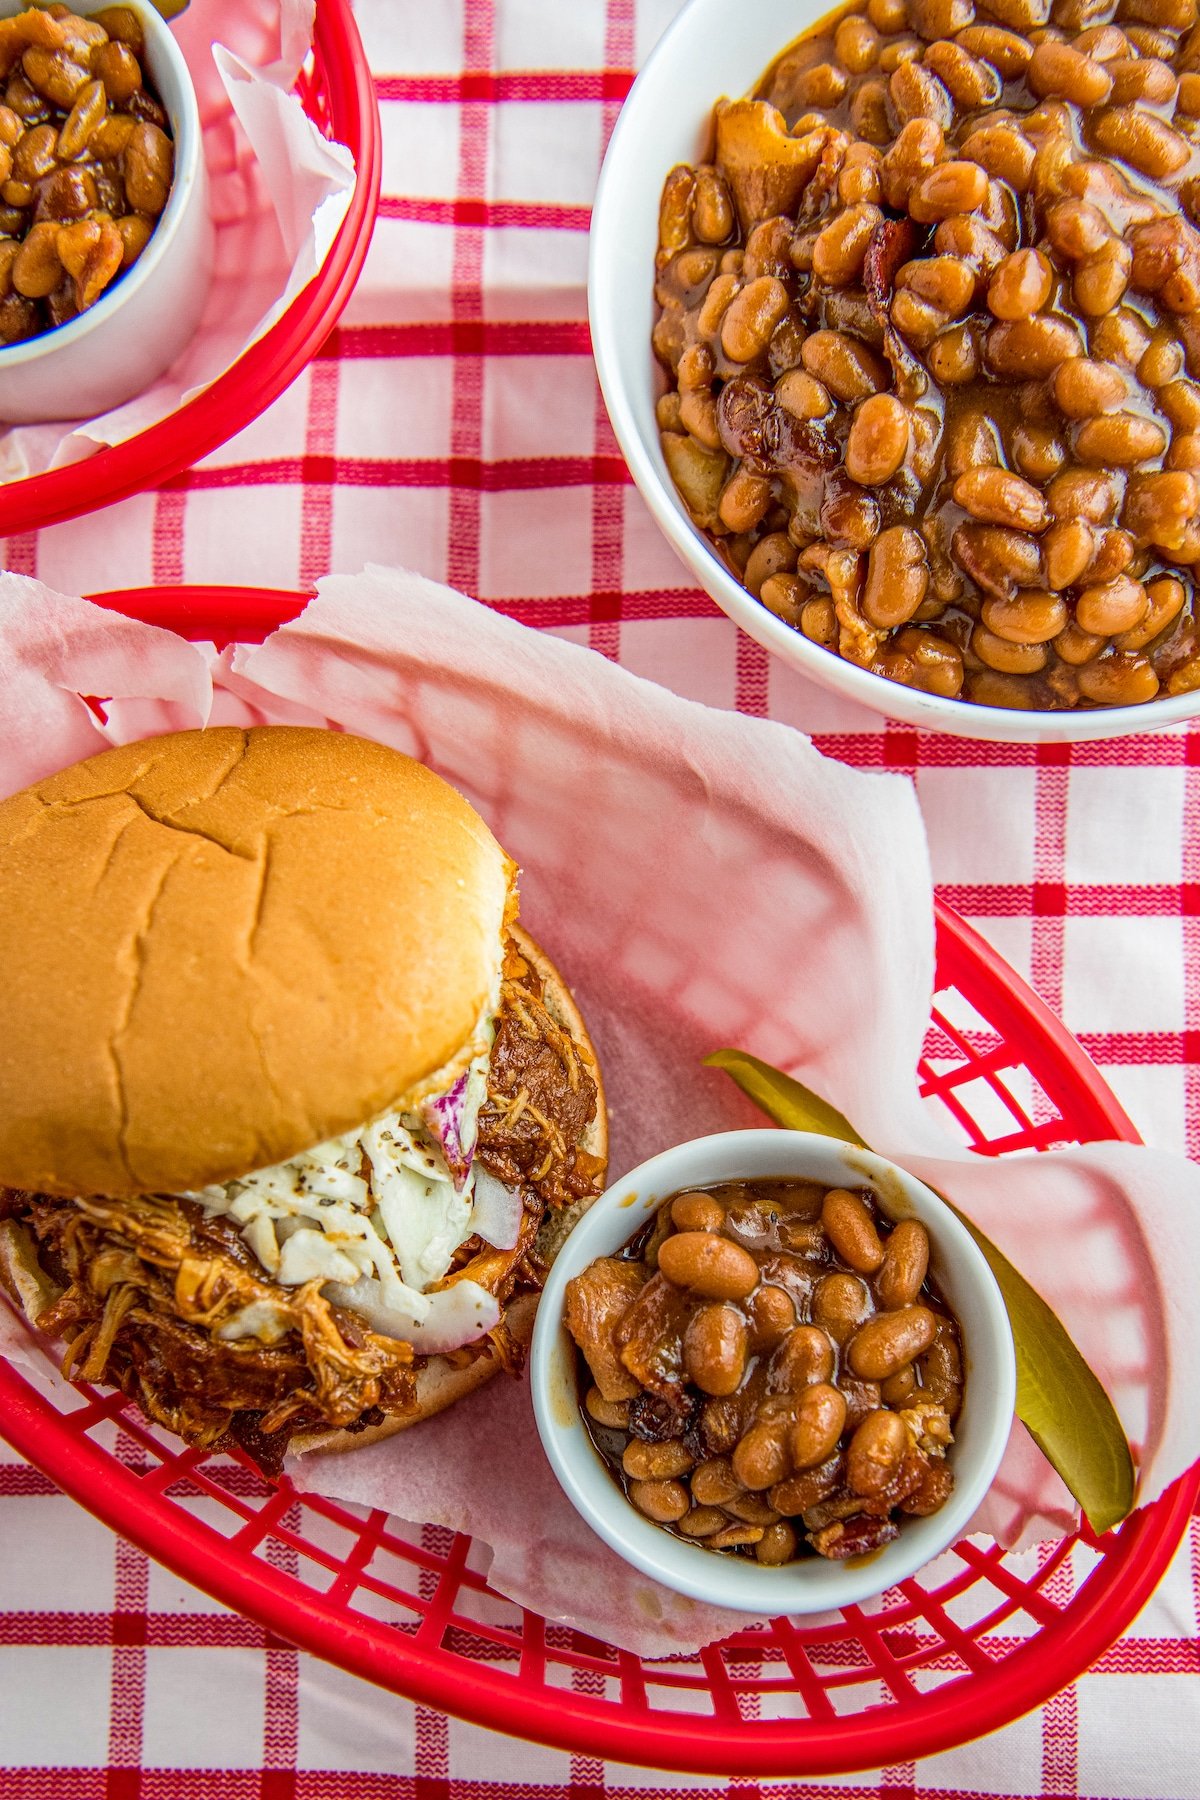 Baked beans in bowls with a pulled pork sandwich and pickle.